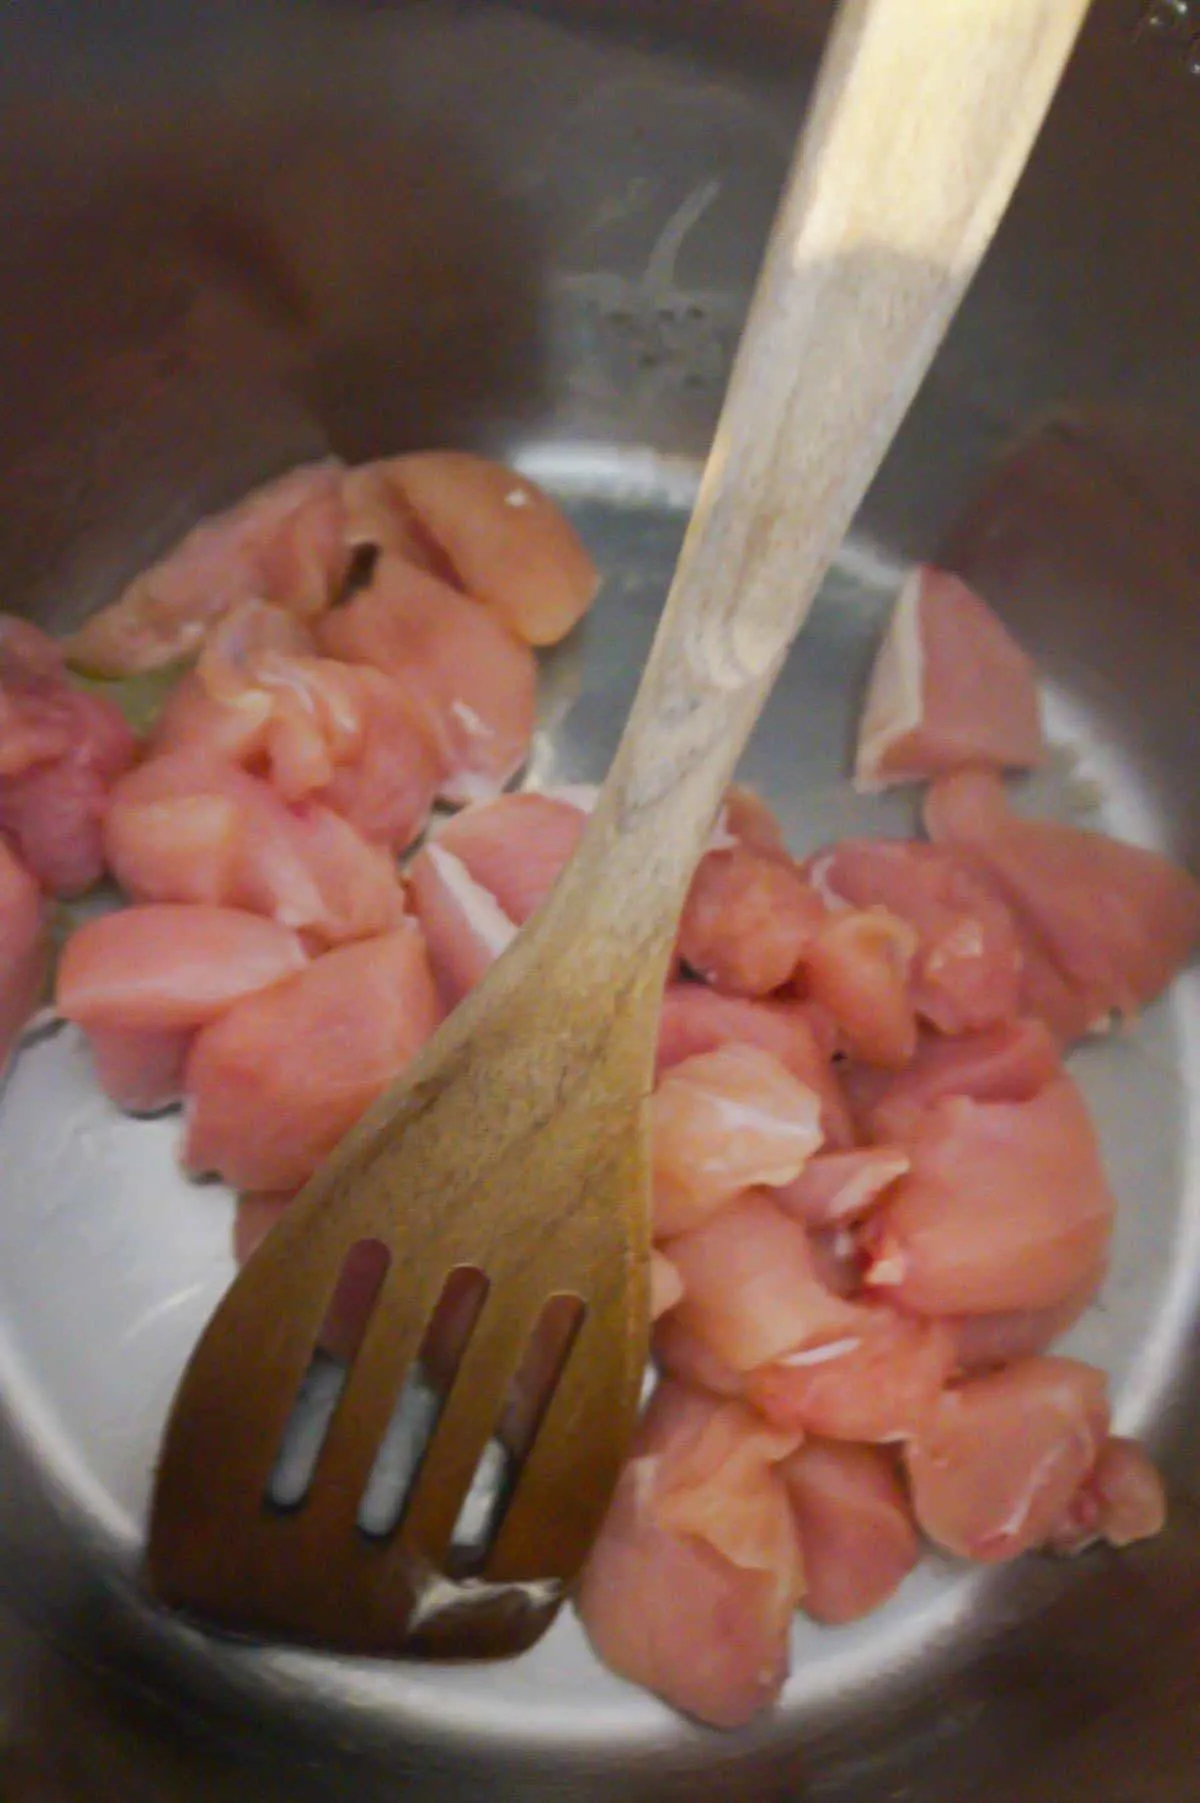 raw chicken breast chunks in an Instant Pot